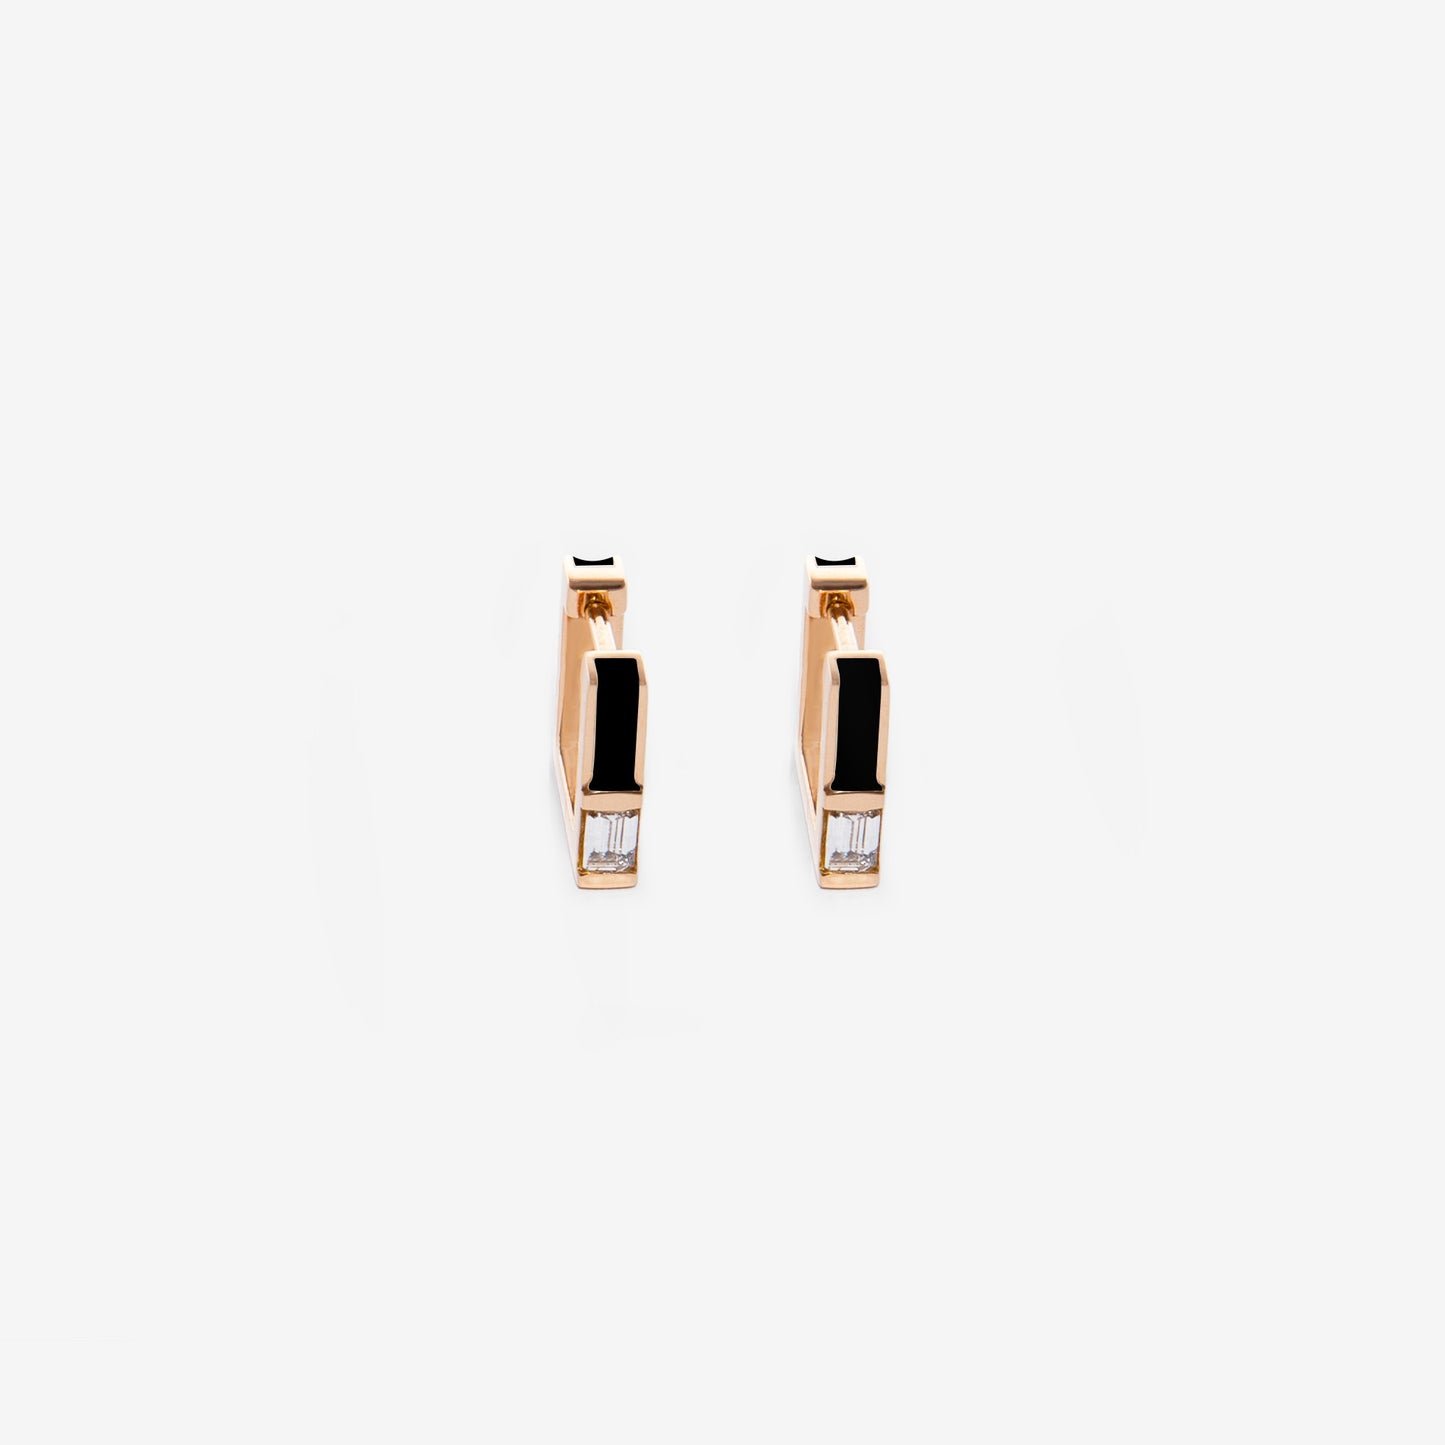 Square black earrings with diamonds